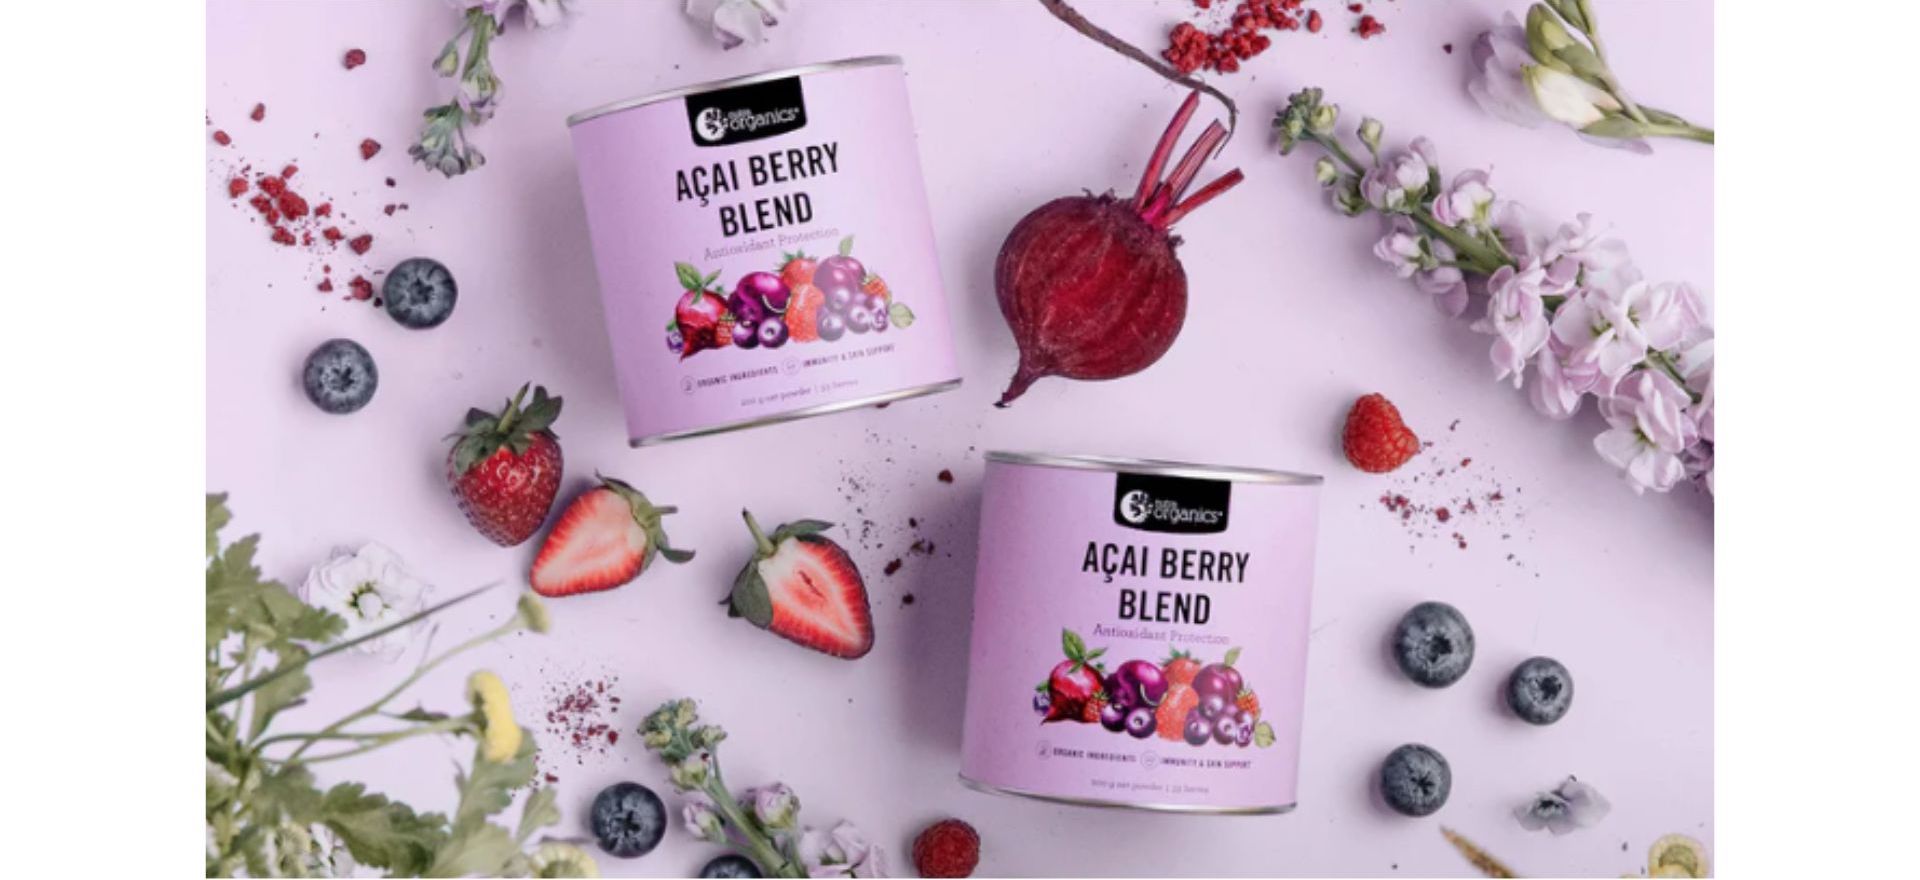 Acai Berry Blend - Foods to boost immunity